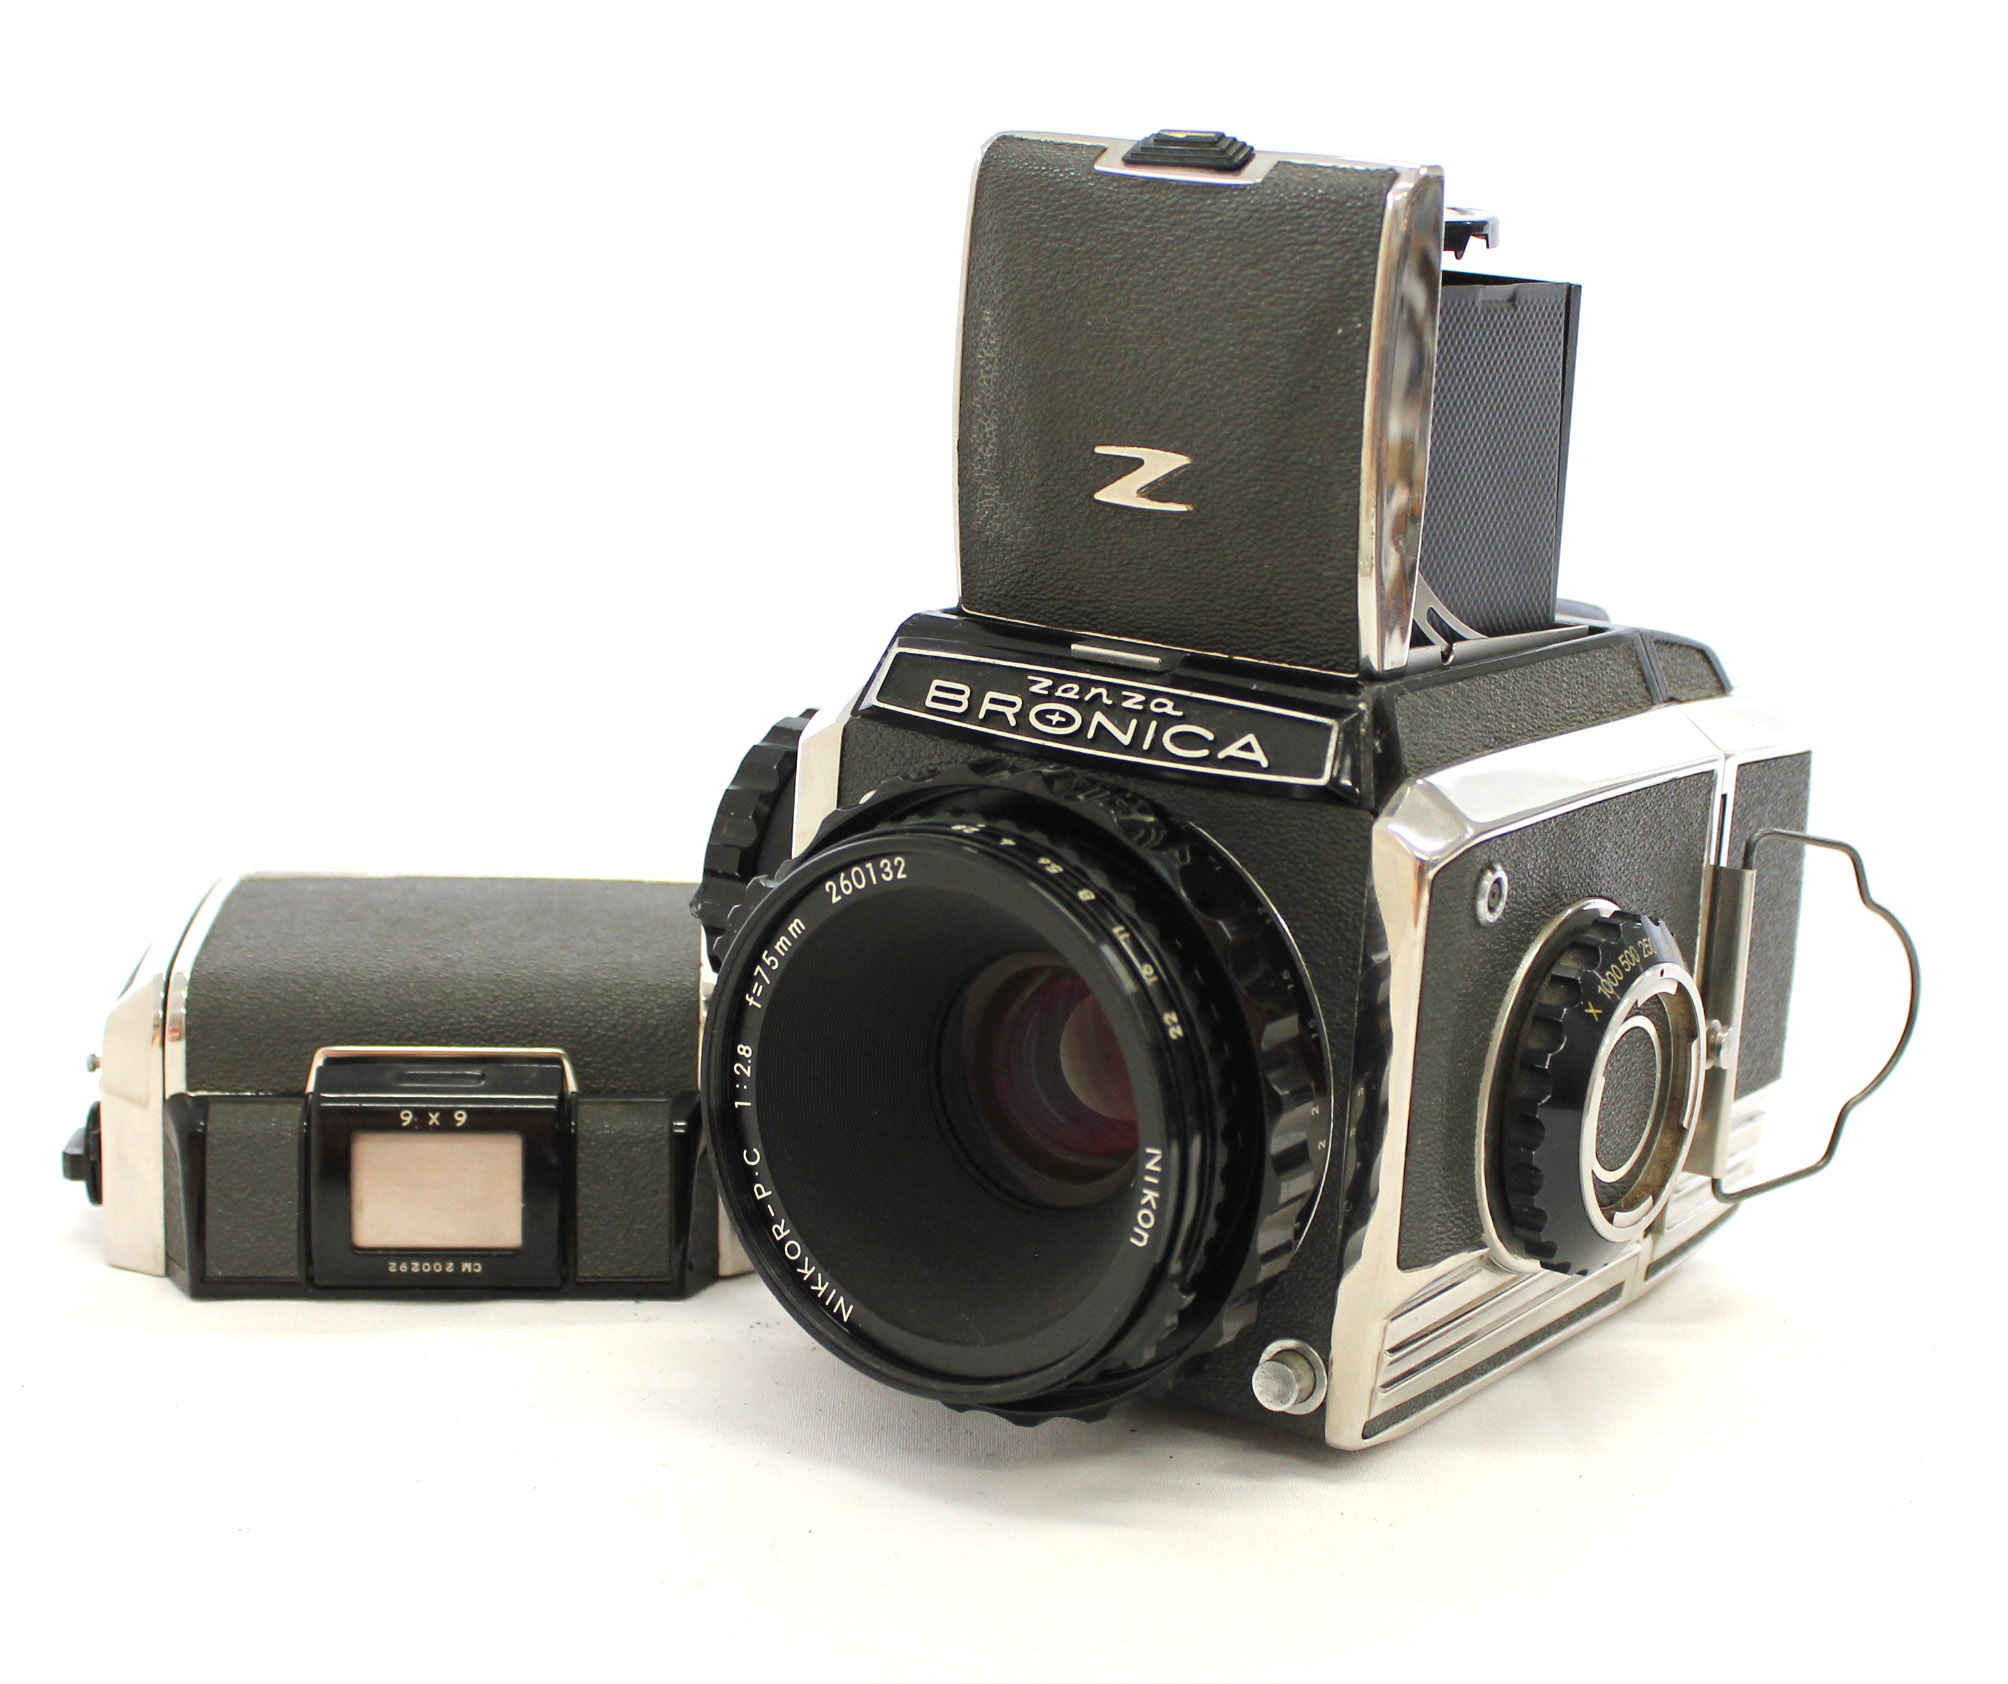 [Exc+++++] Zenza Bronica S2A Final Model (S/N CB164*) w/ Nikkor H.C 75mm F/2.8 & 2 of 6x6 Film Back from Japan